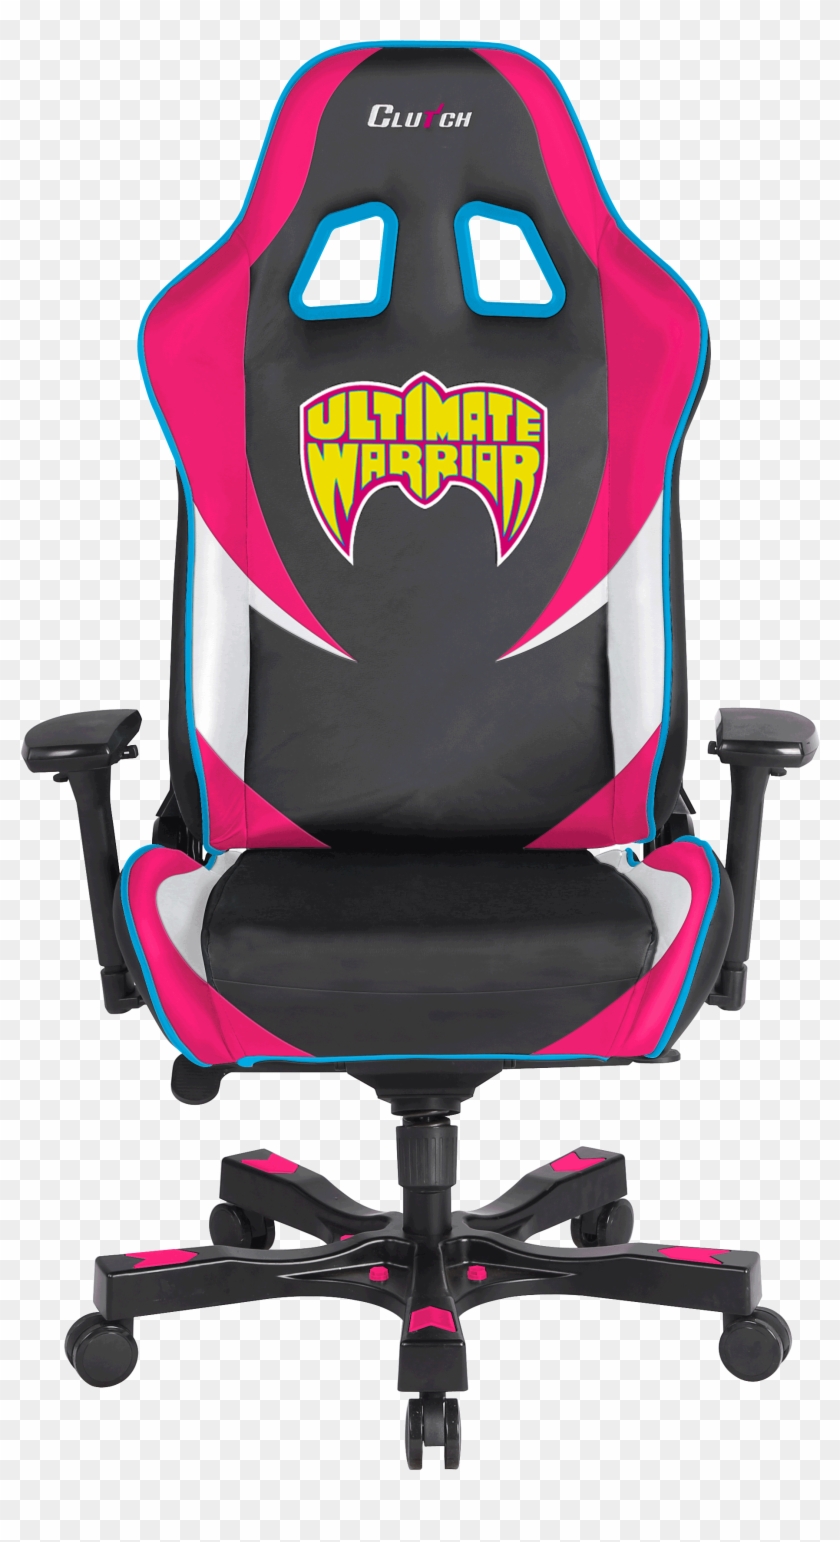 The Ultimate Warrior Clipart Transparent Png Images - Pewdiepie Chair 399 Meme #1096216